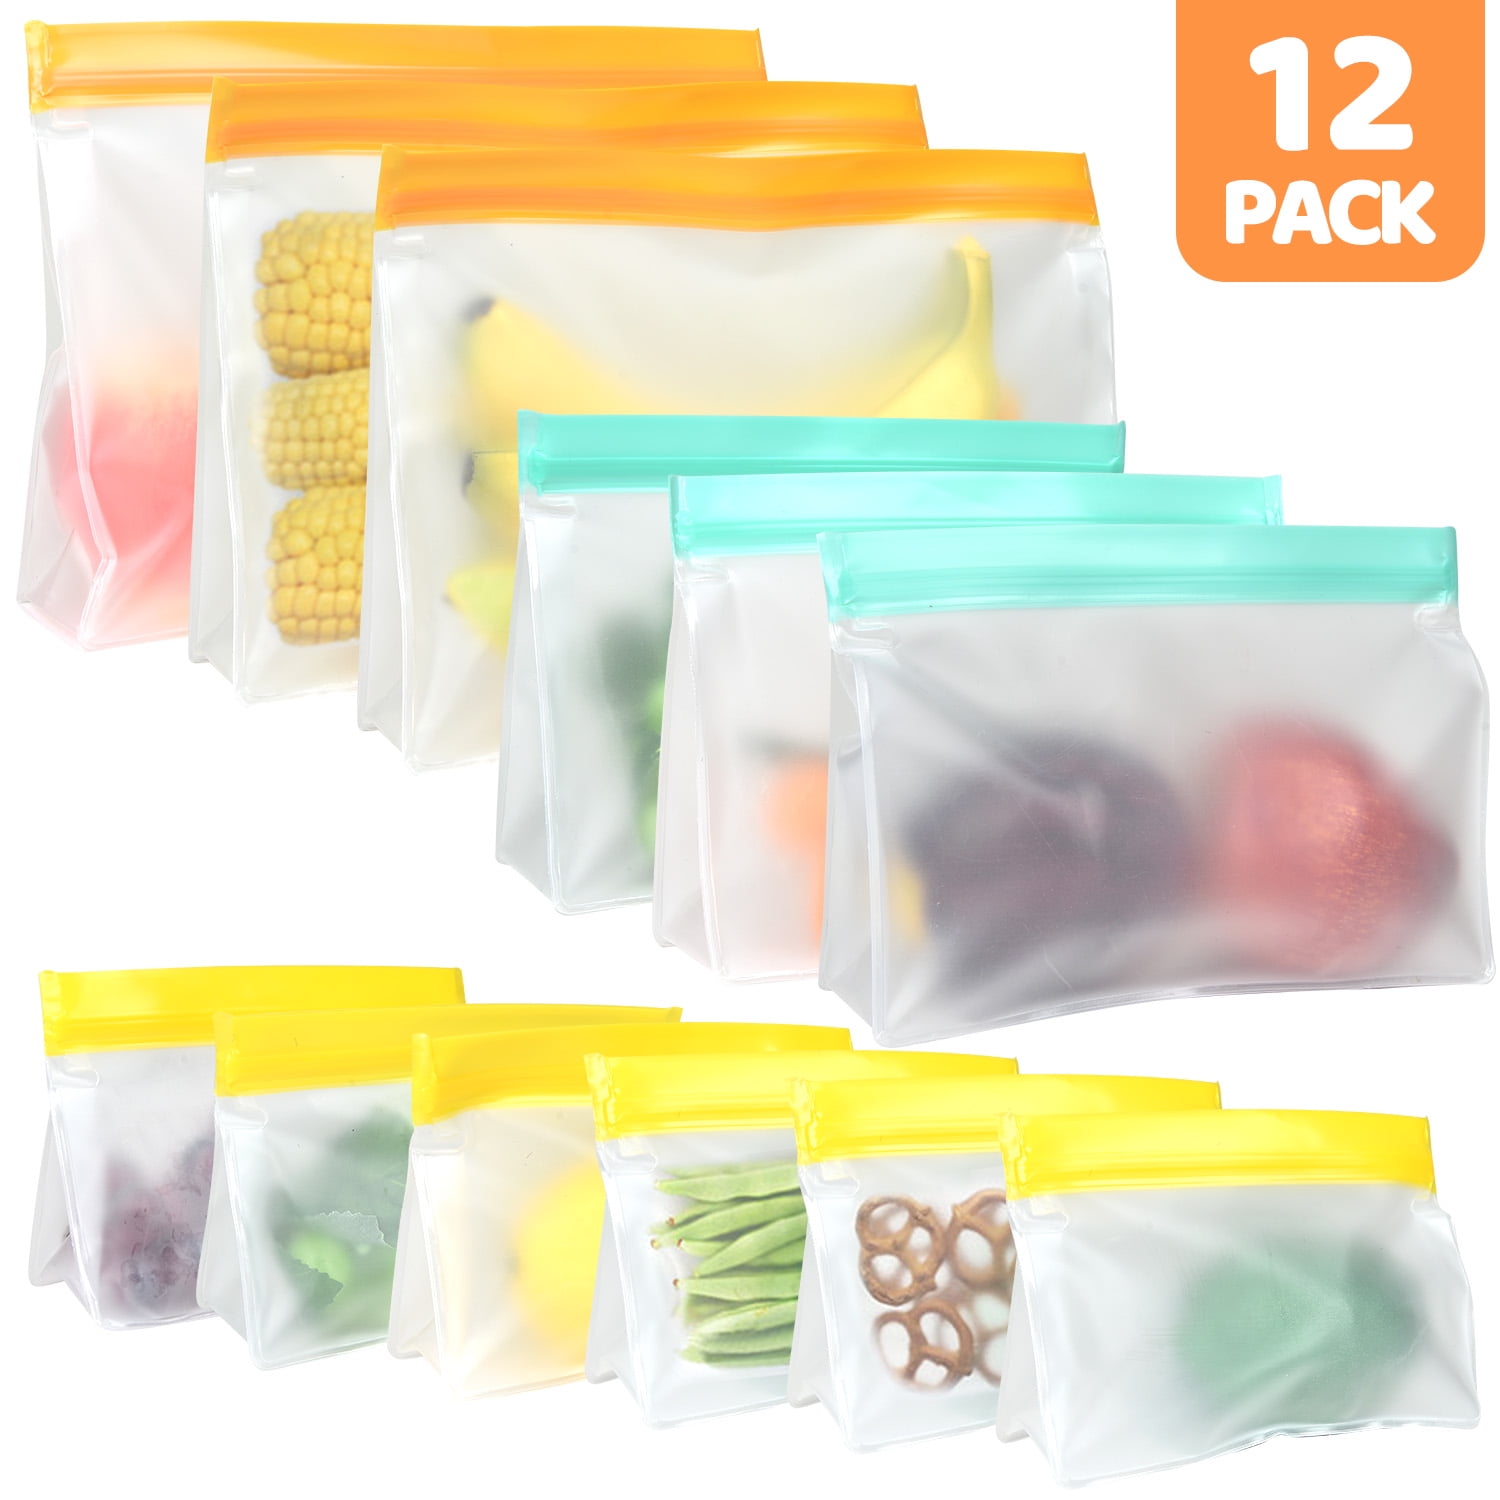 Reusable Food Storage Bags 8 Pack - Stand Up BPA FREE Leakproof Freezer  Bags( 4 pack 1/2 Gallon Bags + 4 pack Sandwich Bags) Plastic Free Lunch Bag  